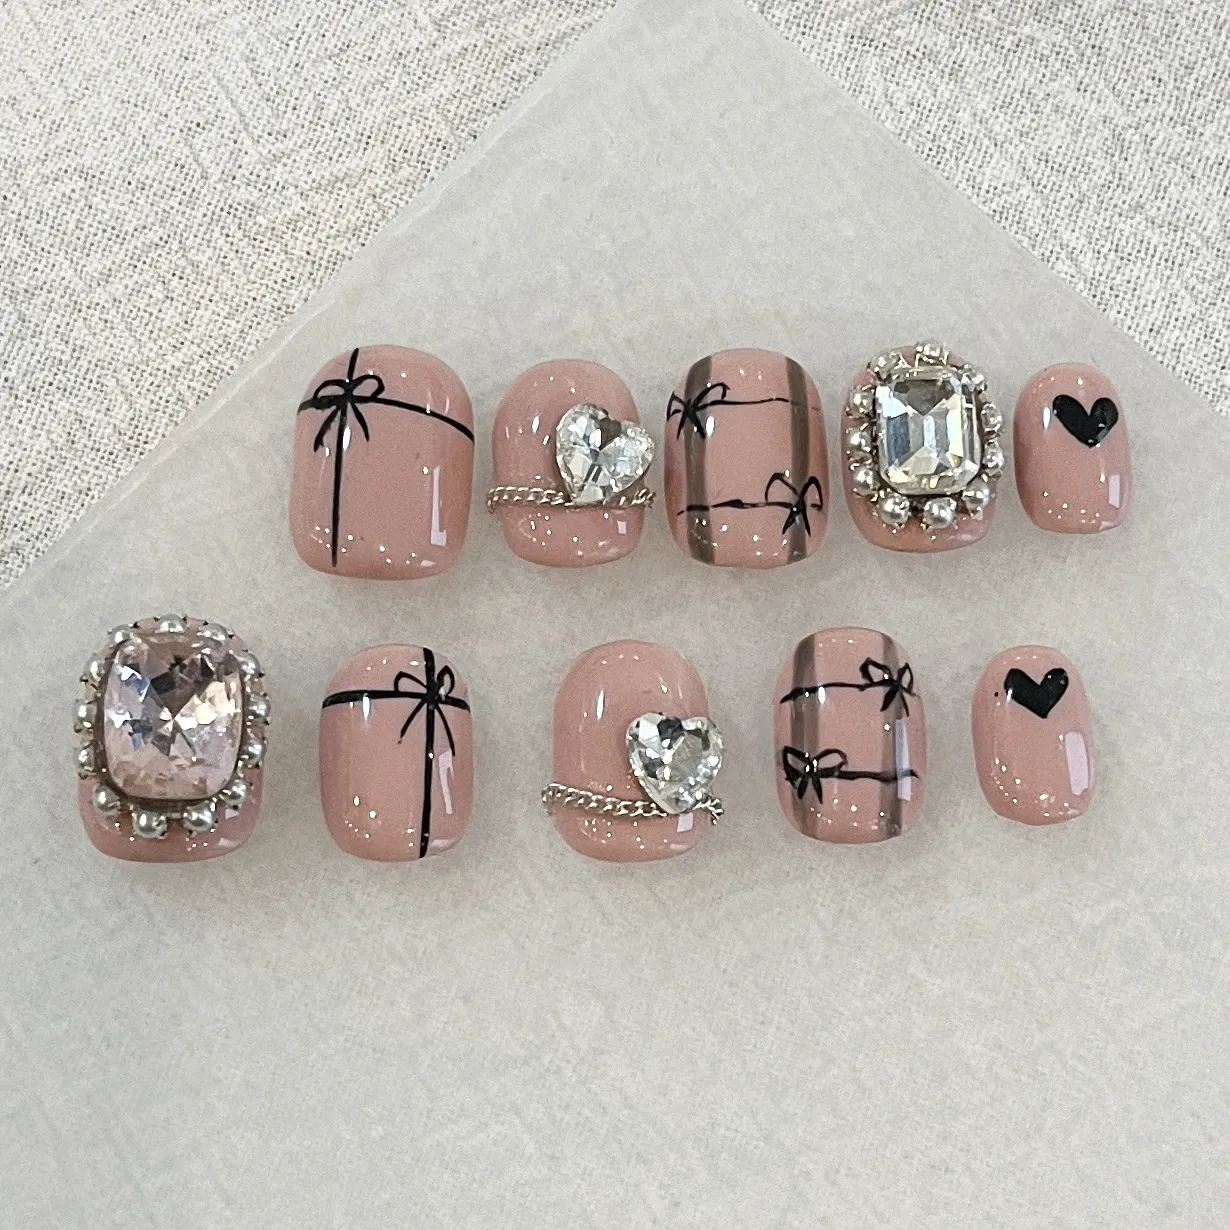 Square Lovely Pink Nails Stripe Rhinestones Design Full Cover Handmade Wear Nails High Quality Press On Nails